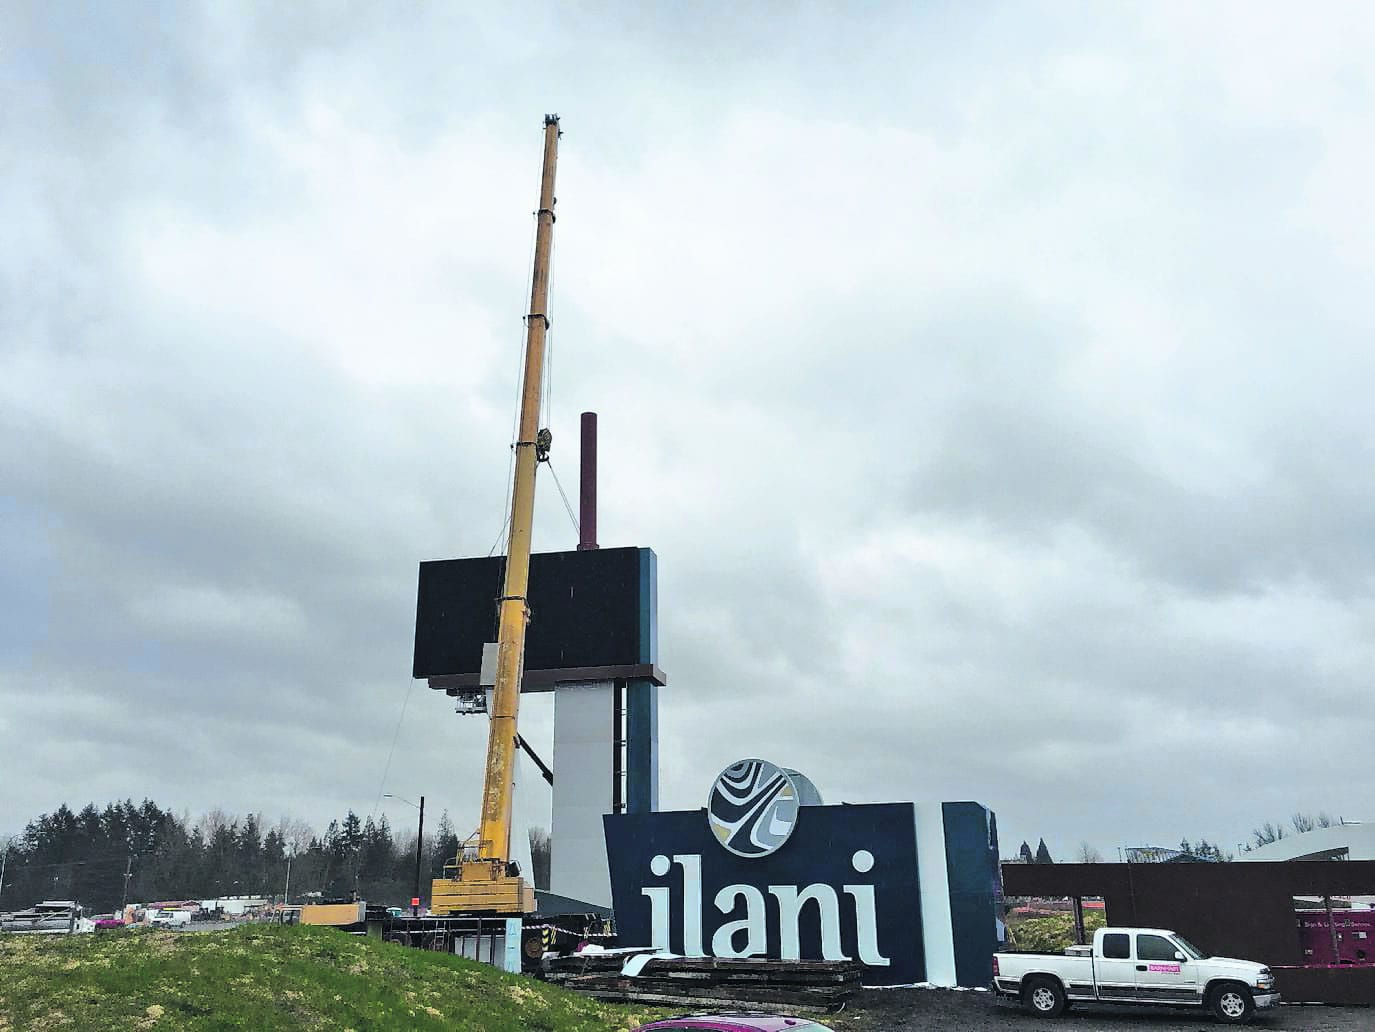 Ilani Casino Resort, along Interstate 5 west of La Center, began erecting its sign on Friday. A big economic splash is expected when it opens in mid-April with more than 1,000 employees and 15 as-yet-unrevealed restaurants, shops and bars. The casino, at 368,000 square feet, reportedly cost $510 million. It is jointly developed by the Cowlitz Tribe and Mohegan Tribe of Indians of Connecticut.